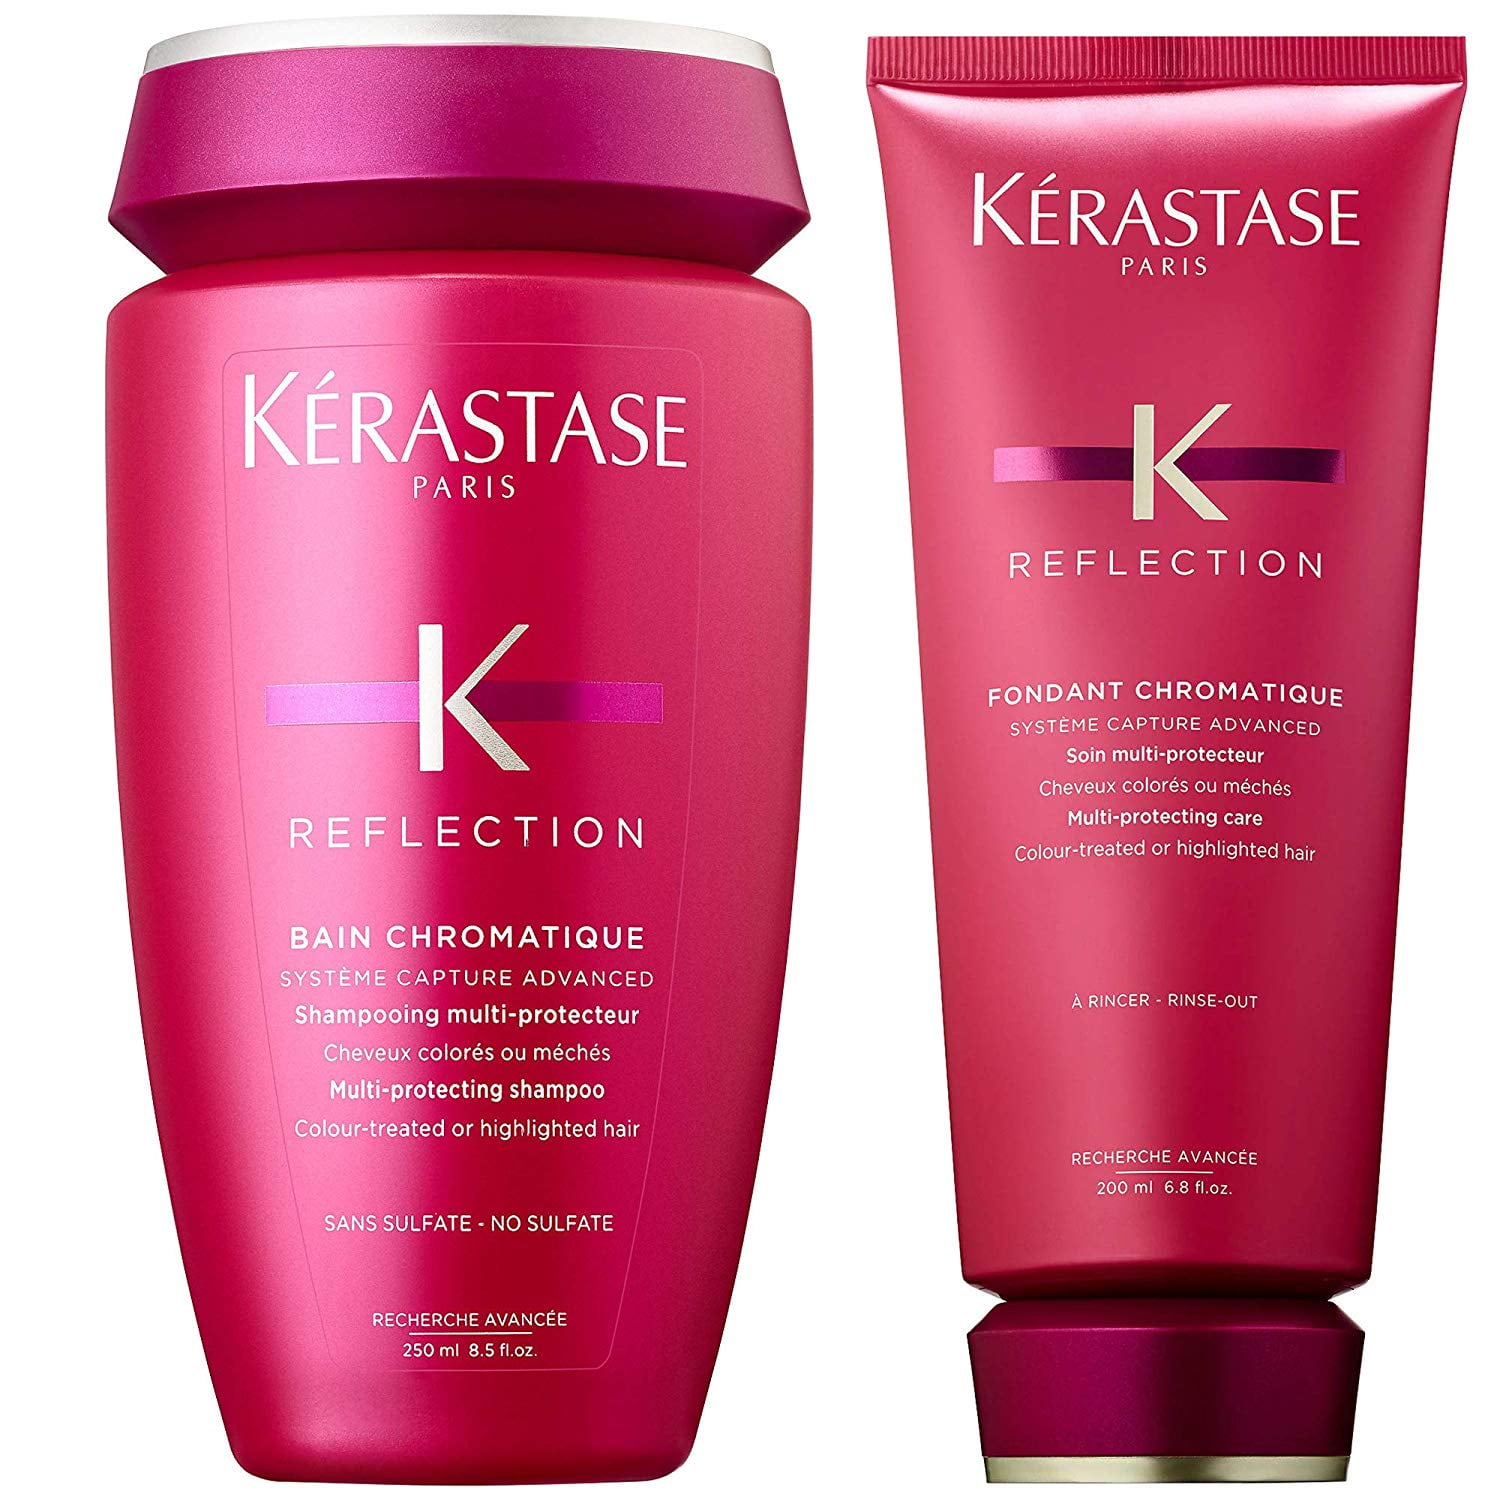 Kerastase Reflection Luxury Hair Care Gift Set for Color Treated Hair